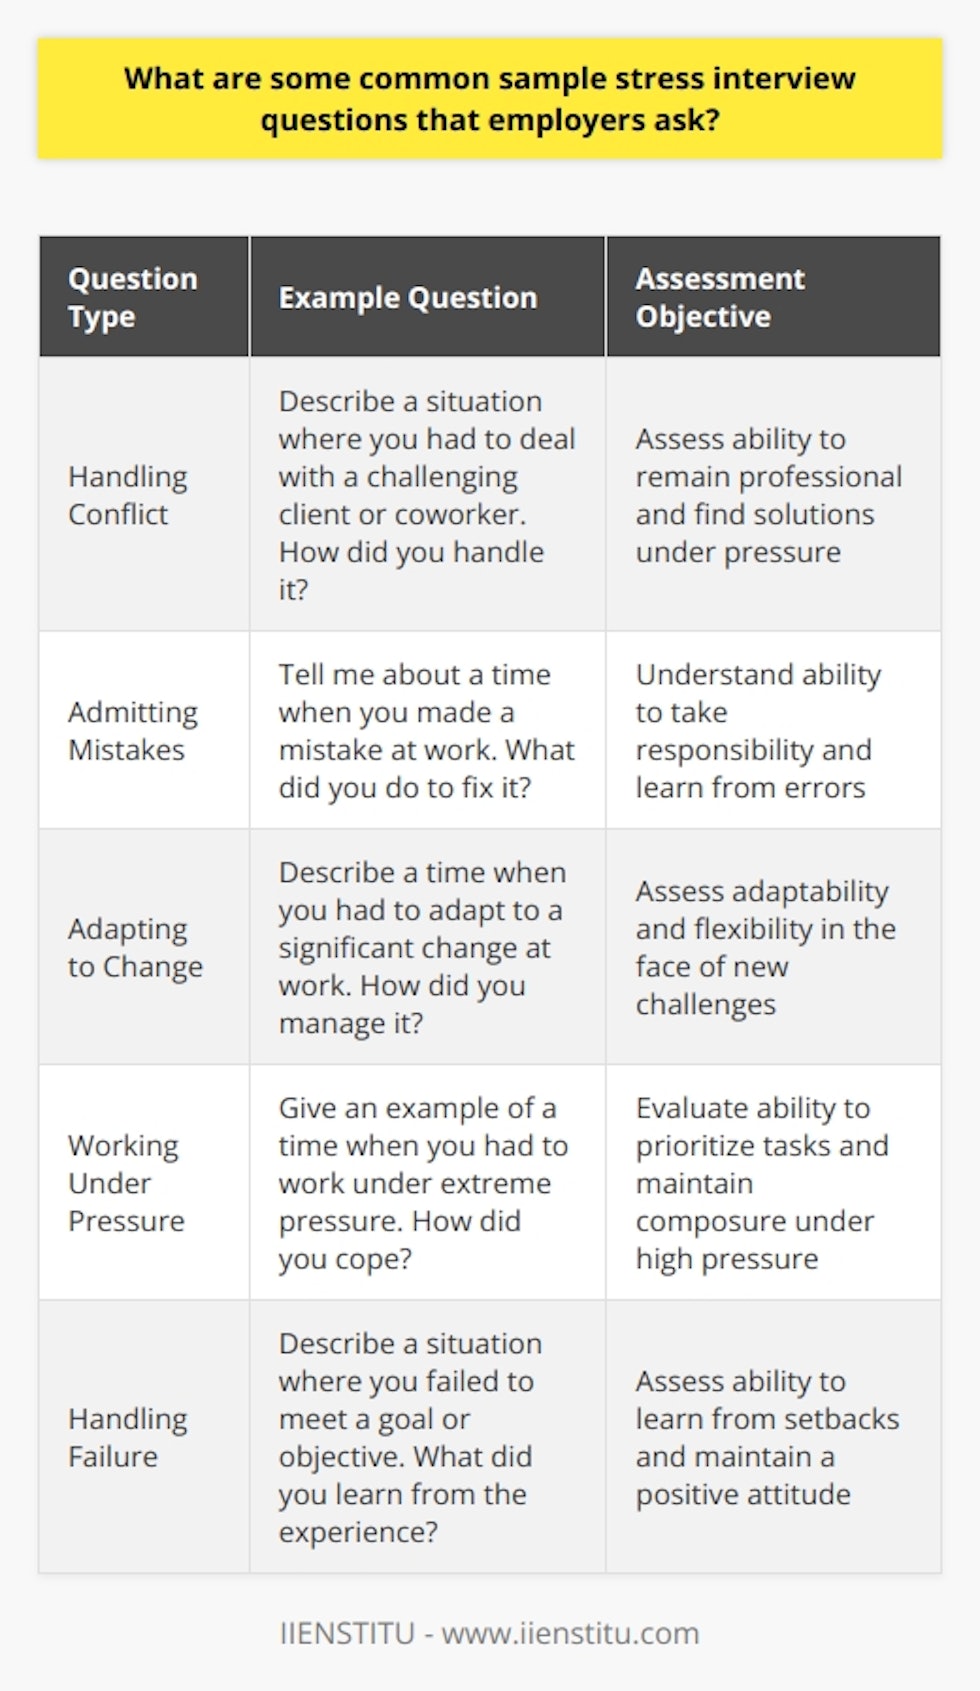 Employers often use stress interview questions to assess a candidates ability to handle pressure and think on their feet. These questions are designed to put the interviewee in an uncomfortable or challenging situation, testing their problem-solving skills and resilience. Some common sample stress interview questions include: Handling Conflict Employers may ask about a time when you faced a difficult colleague or customer and how you resolved the issue. They want to know if you can remain professional and find solutions under pressure. Example question:  Describe a situation where you had to deal with a challenging client or coworker. How did you handle it?  Admitting Mistakes Interviewers might inquire about a time when you made a mistake at work and how you addressed it. They seek to understand your ability to take responsibility and learn from your errors. Example question:  Tell me about a time when you made a mistake at work. What did you do to fix it?  Adapting to Change Companies often ask questions related to your adaptability and flexibility in the face of change. They want to know if you can adjust your approach when faced with new challenges or situations. Example question:  Describe a time when you had to adapt to a significant change at work. How did you manage it?  Working Under Pressure Employers may ask about your experience working under tight deadlines or in high-pressure situations. They want to assess your ability to prioritize tasks and maintain composure when the stakes are high. Example question:  Give an example of a time when you had to work under extreme pressure. How did you cope?  Handling Failure Interviewers might ask about a time when you failed at a task or project and how you bounced back. They want to know if you can learn from setbacks and maintain a positive attitude. Example question:  Describe a situation where you failed to meet a goal or objective. What did you learn from the experience?  By asking these types of stress interview questions, employers can gain valuable insights into a candidates problem-solving abilities, resilience, and capacity to perform under pressure. It is essential for job seekers to prepare for these questions by reflecting on their experiences and developing concise, honest responses that showcase their strengths and growth mindset.